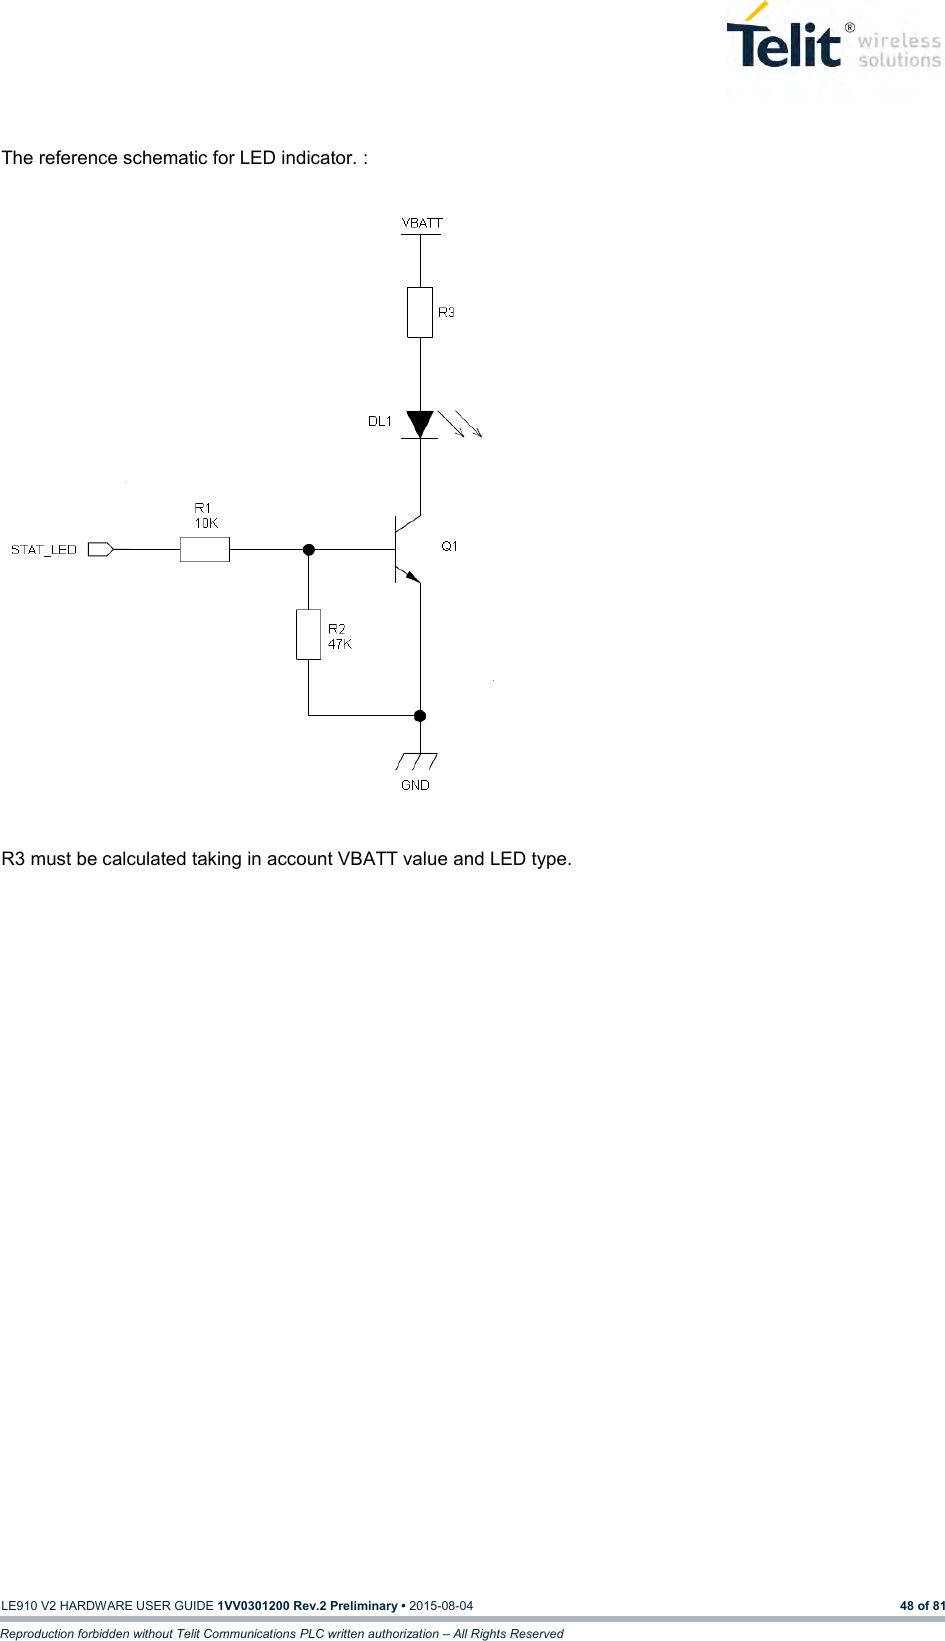   LE910 V2 HARDWARE USER GUIDE 1VV0301200 Rev.2 Preliminary • 2015-08-04 48 of 81 Reproduction forbidden without Telit Communications PLC written authorization – All Rights Reserved  The reference schematic for LED indicator. :                           R3 must be calculated taking in account VBATT value and LED type.   